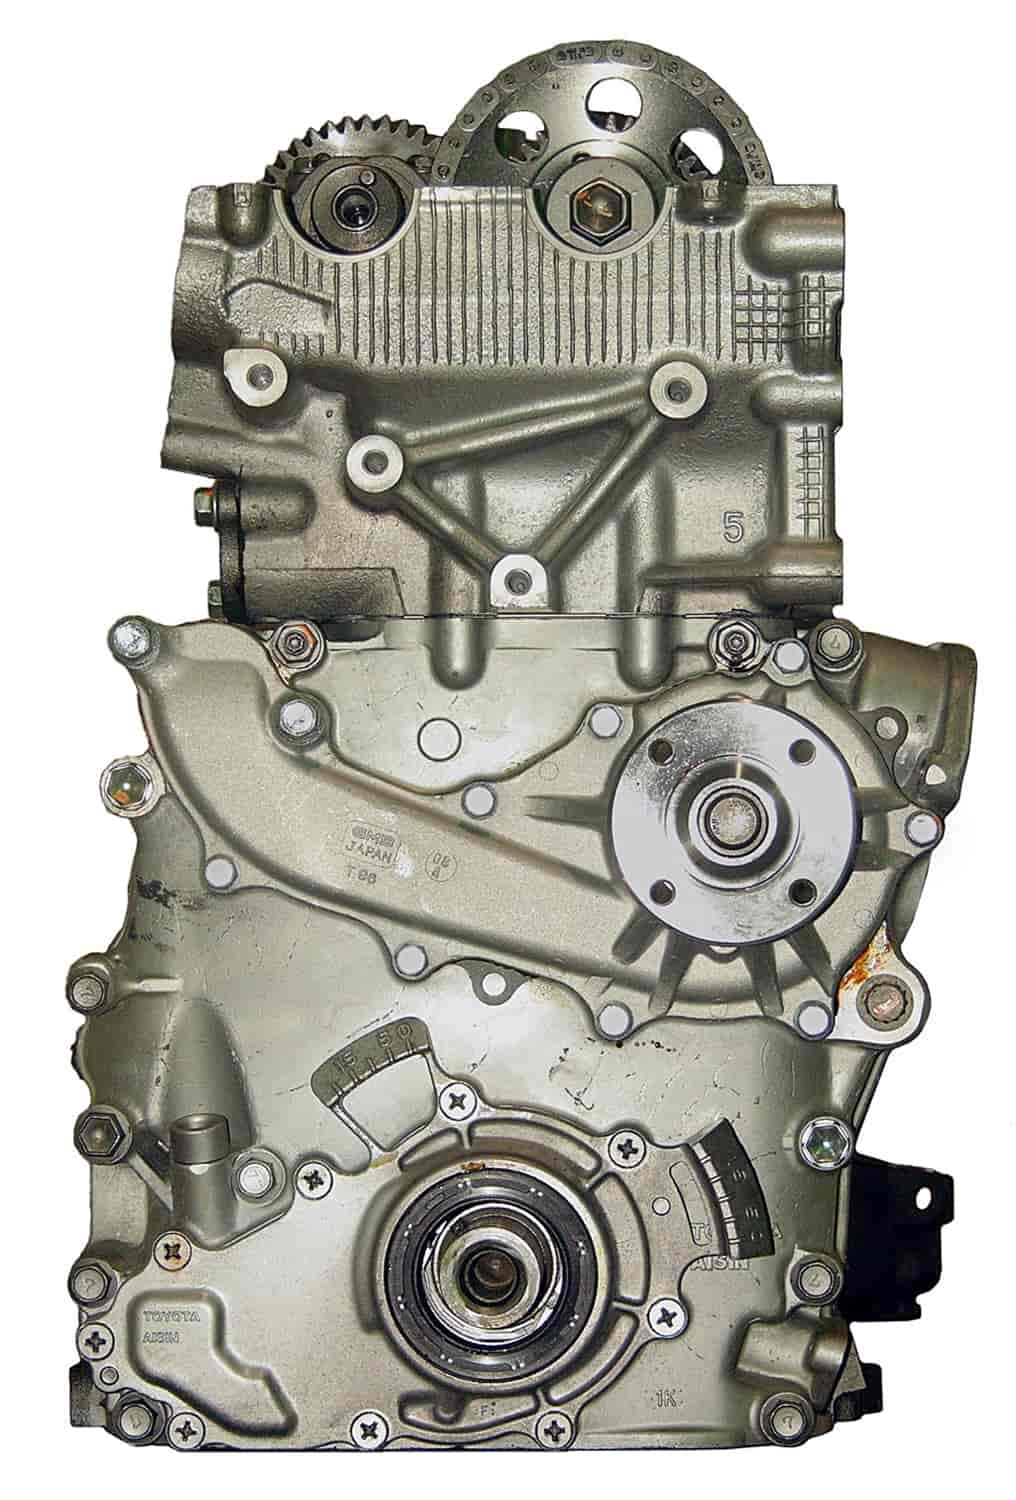 Remanufactured Crate Engine for 1997-2000 Toyota Tacoma with